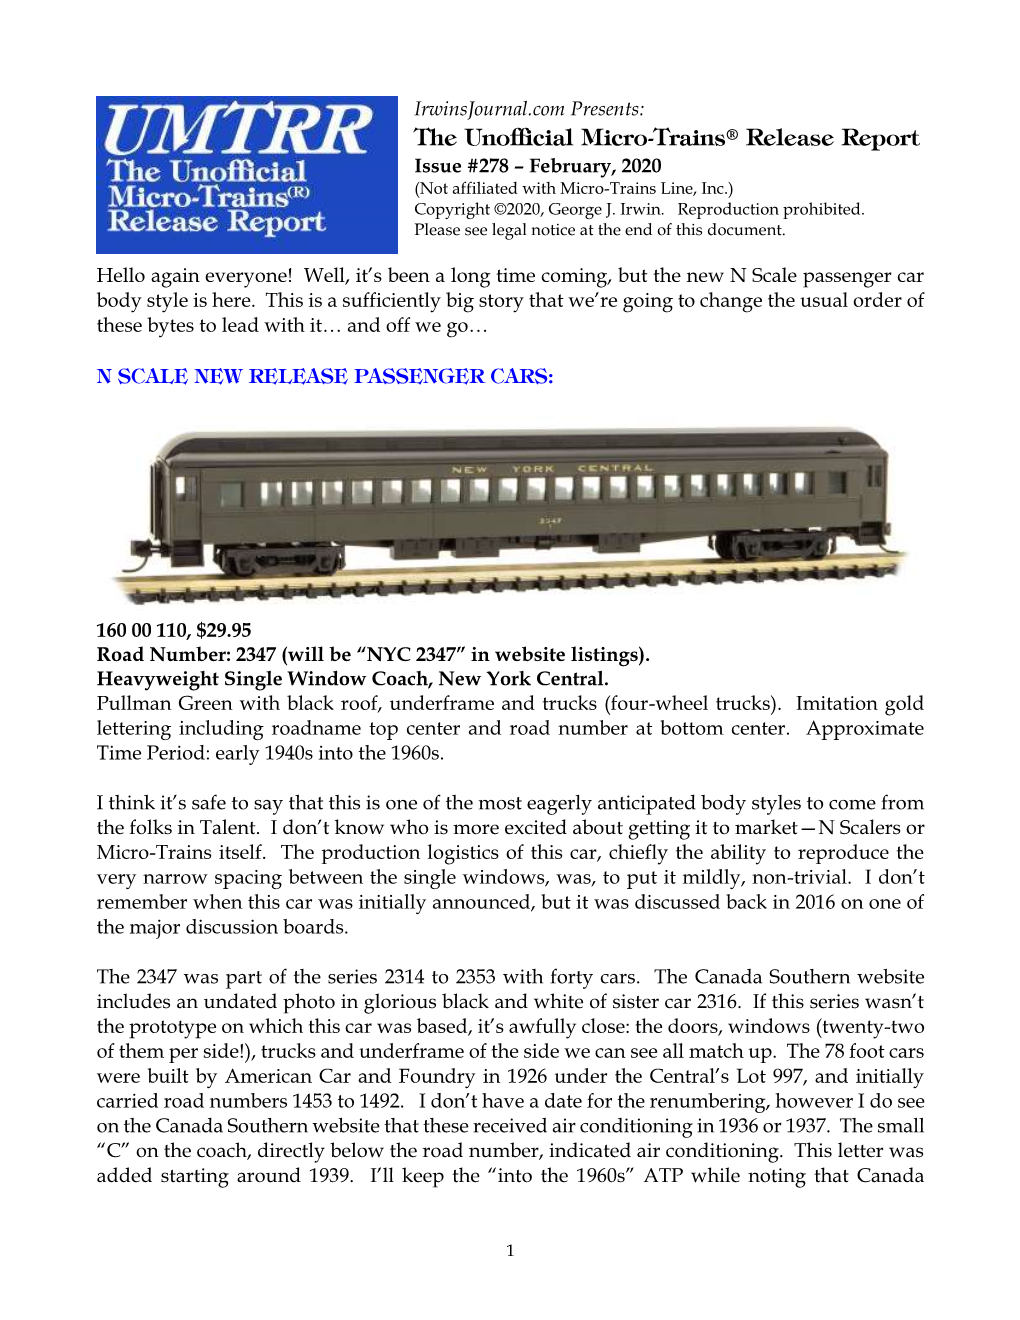 The Unofficial Micro-Trains® Release Report Issue #278 – February, 2020 (Not Affiliated with Micro-Trains Line, Inc.) Copyright ©2020, George J